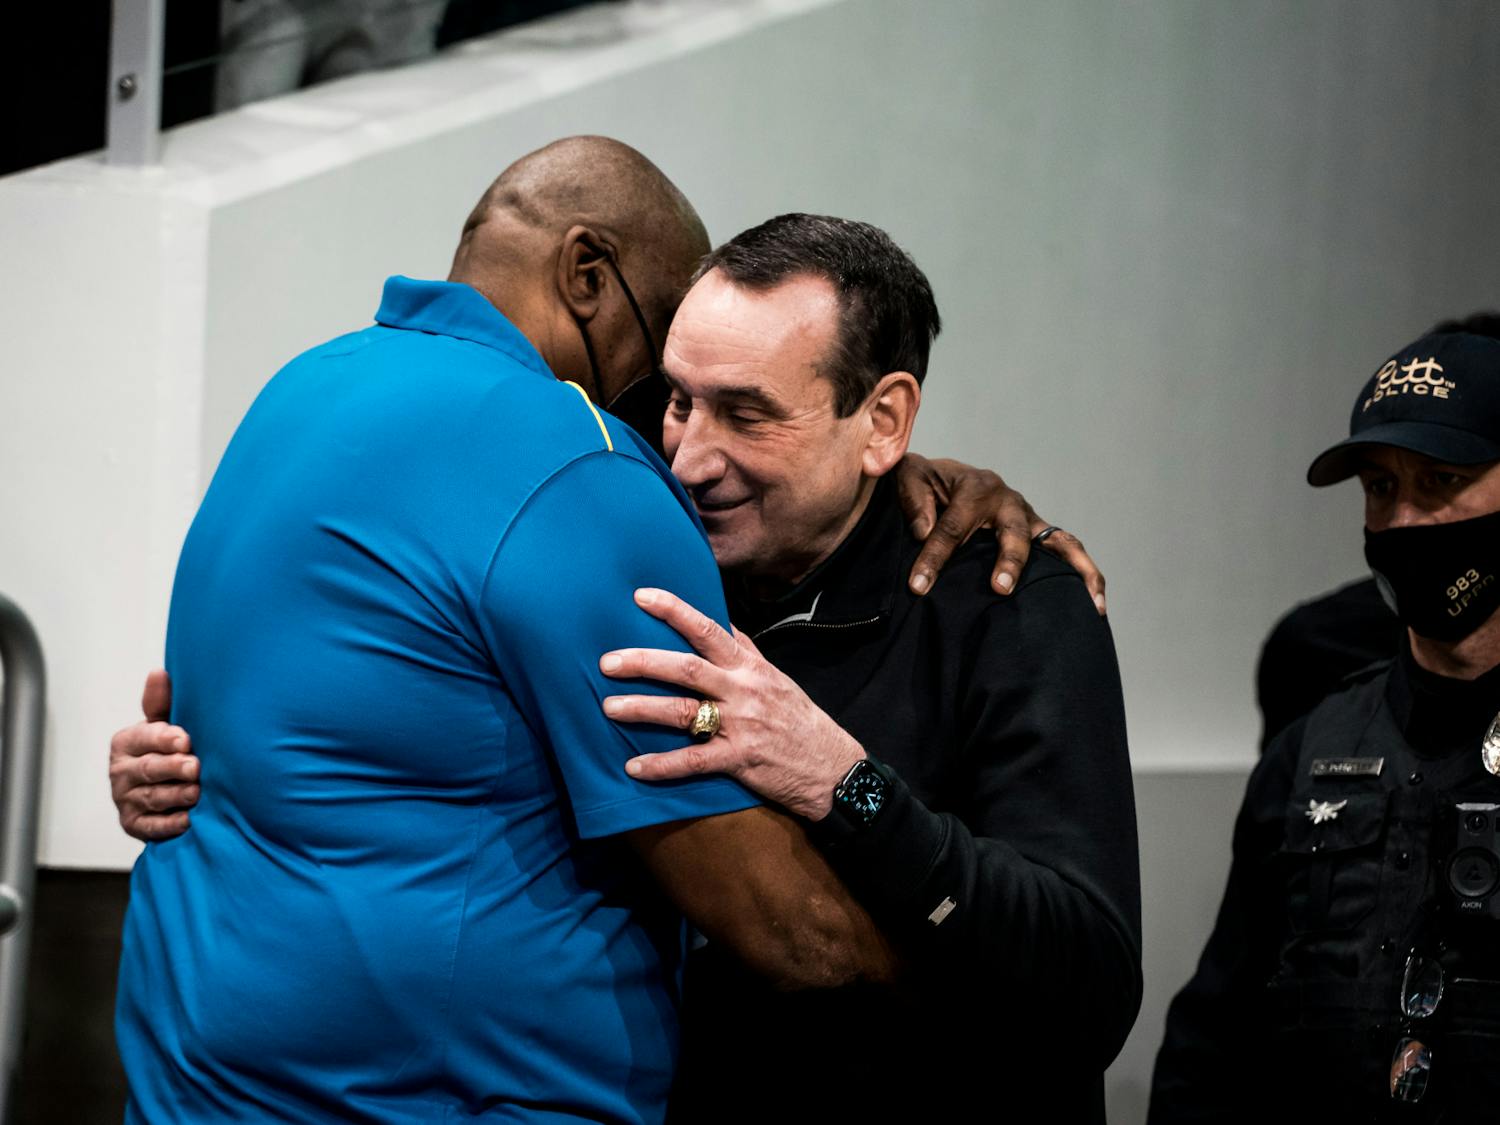 Coach K's last away game was played at Pittsburgh on March 2nd. The Blue Devils took the lead and never let go, beating the Panthers 86-56.